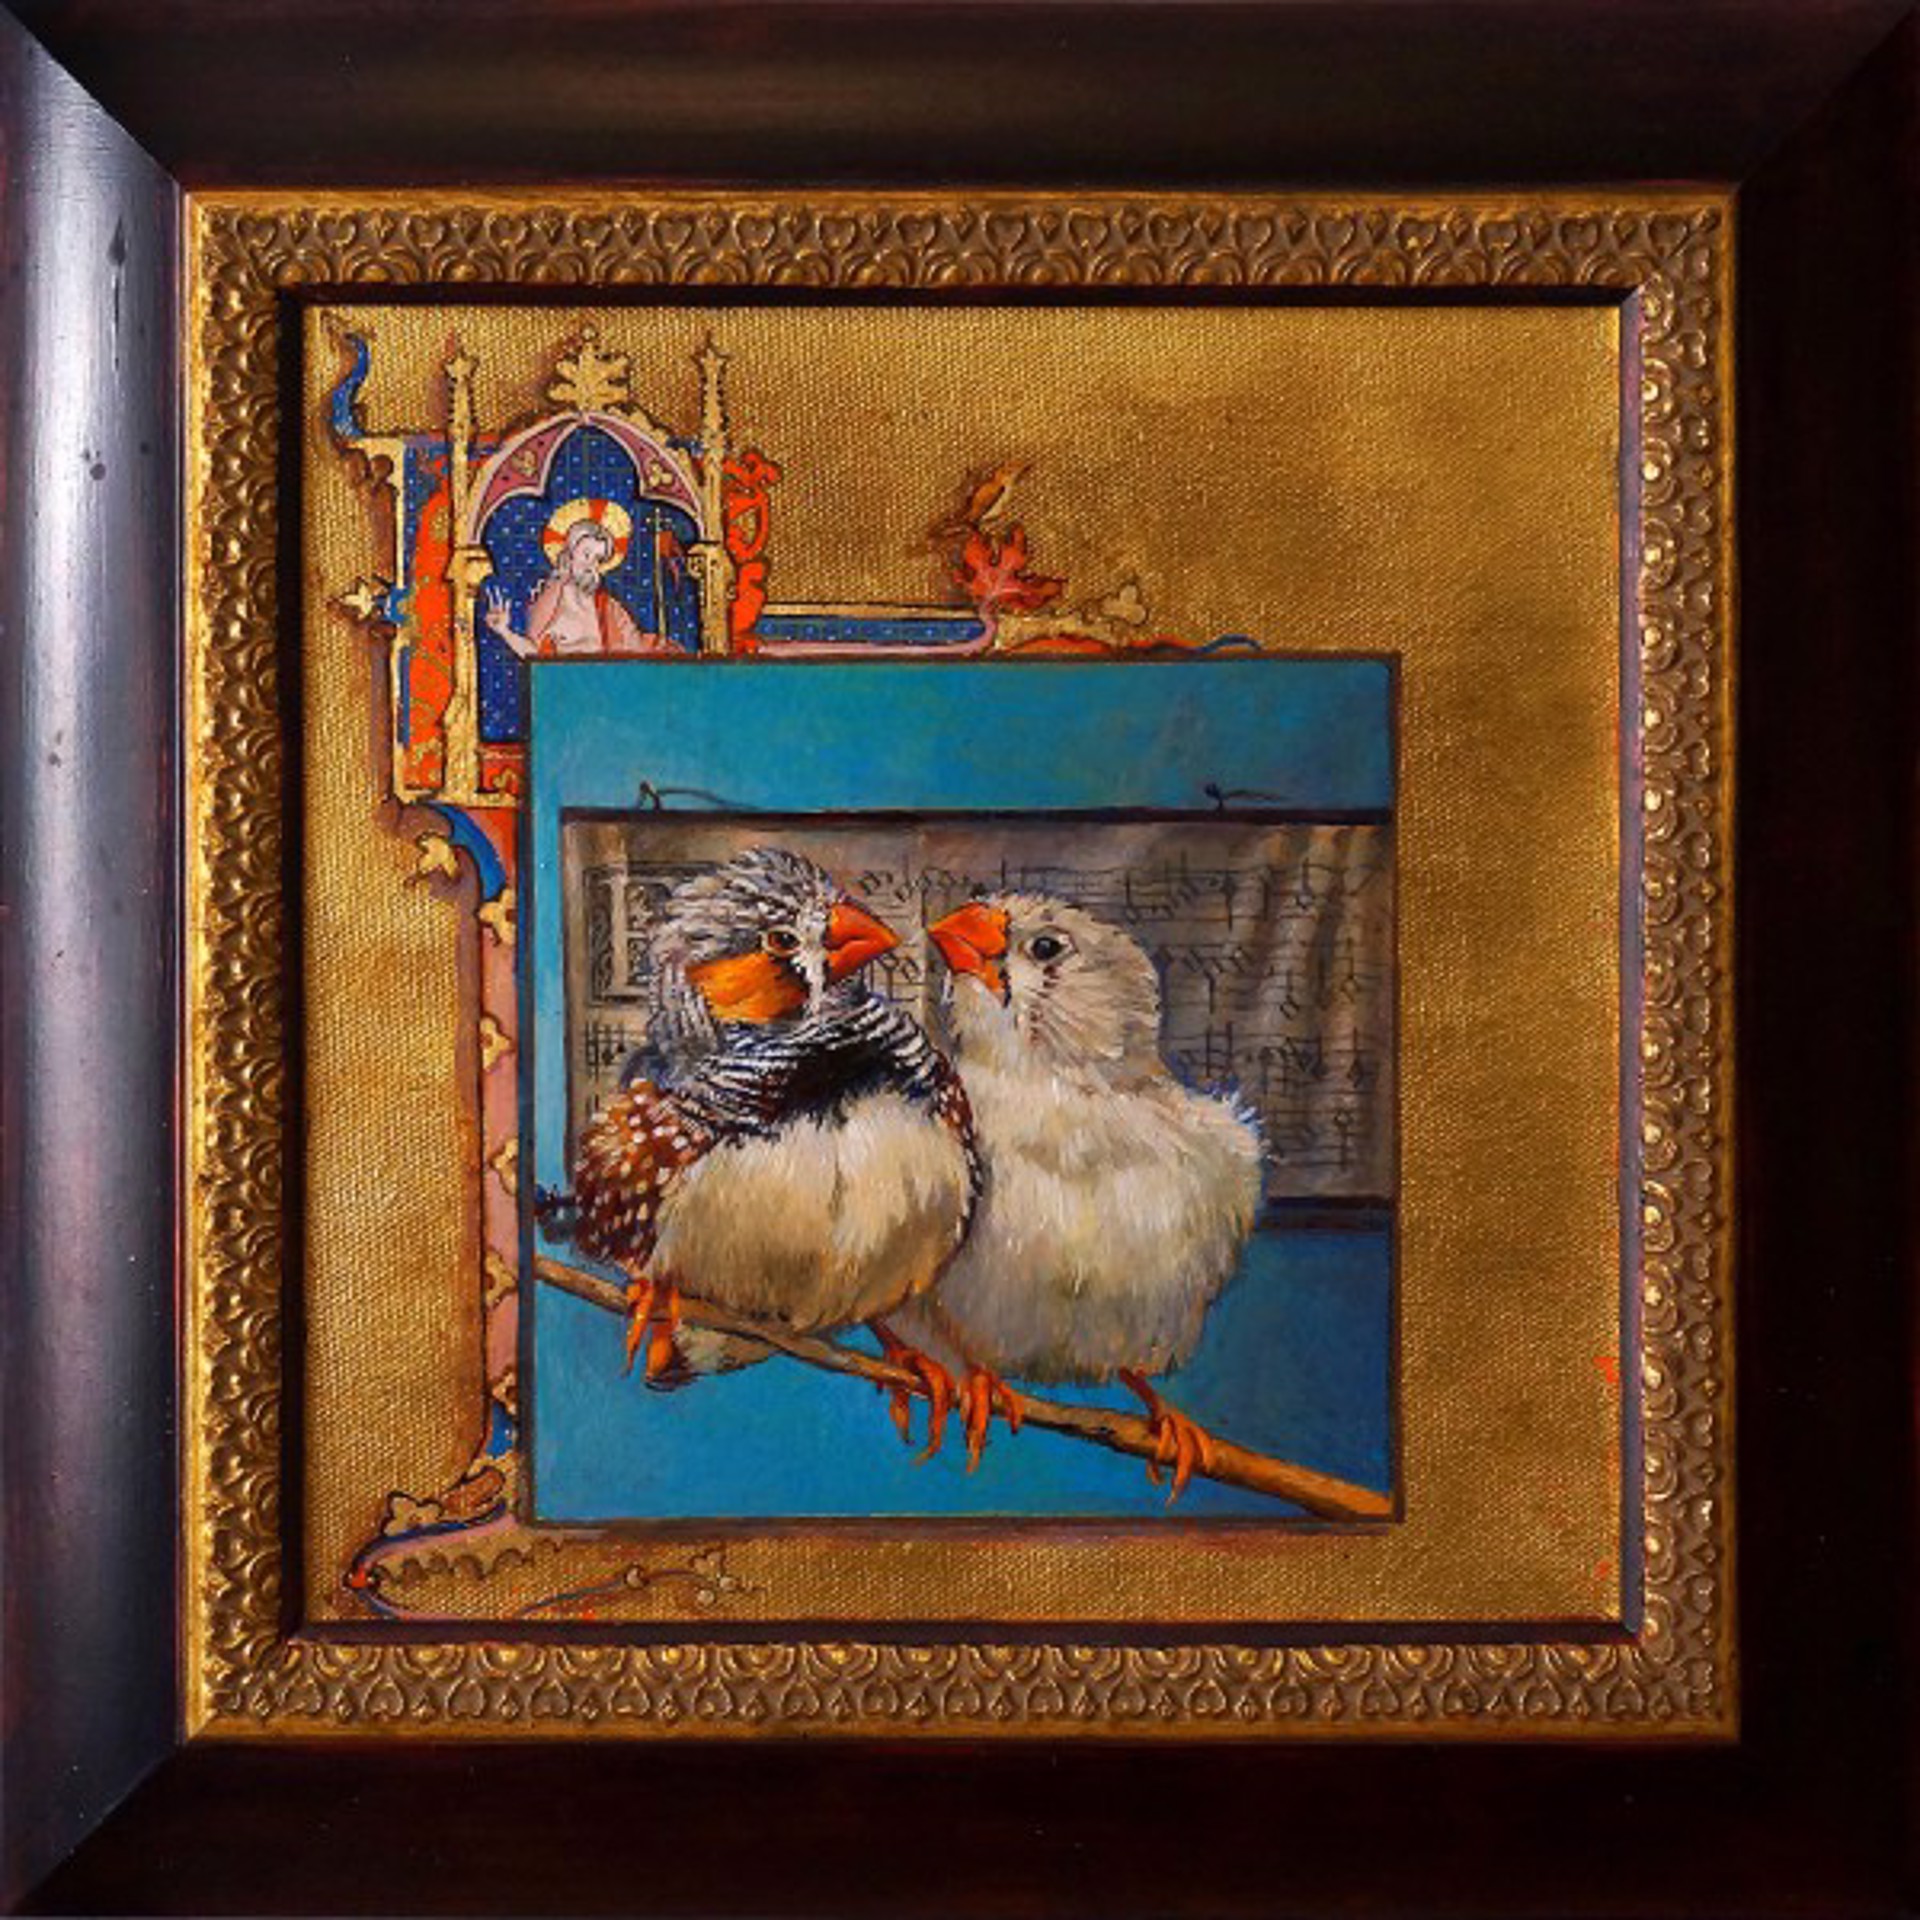 Medieval Birds with 15th Century Music by Kurt Walters